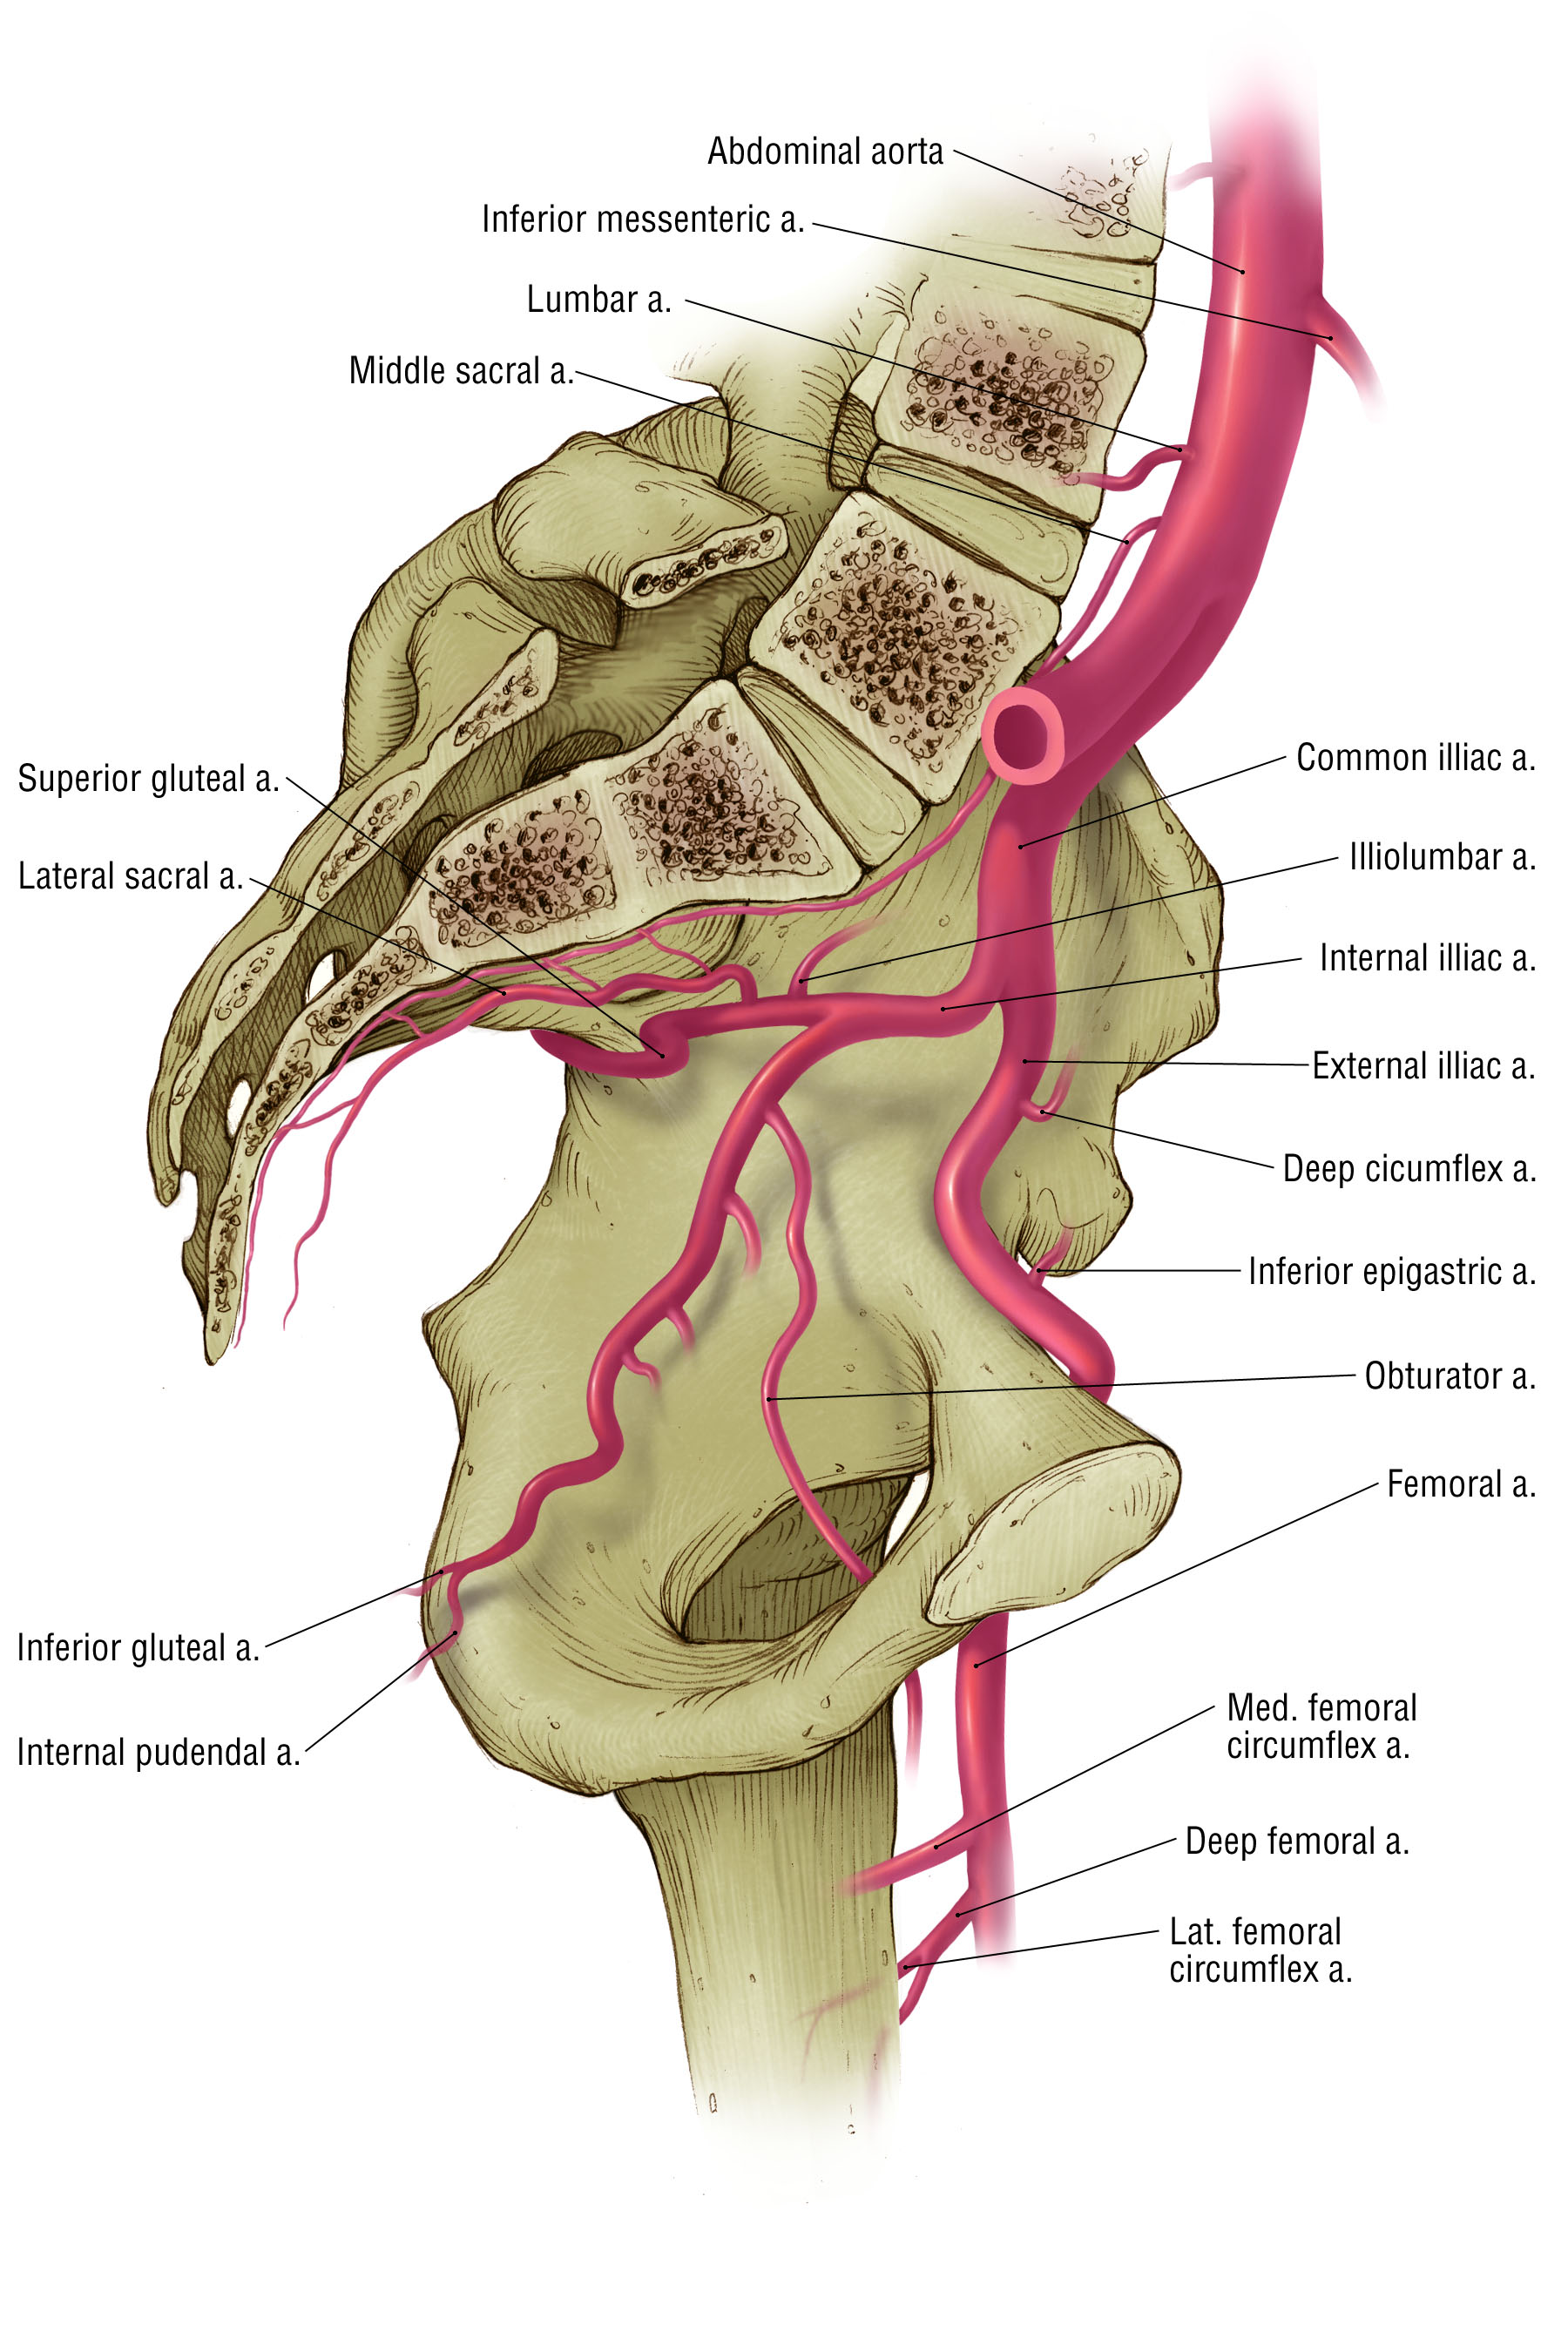 Vasculature of the Lateral Pelvis